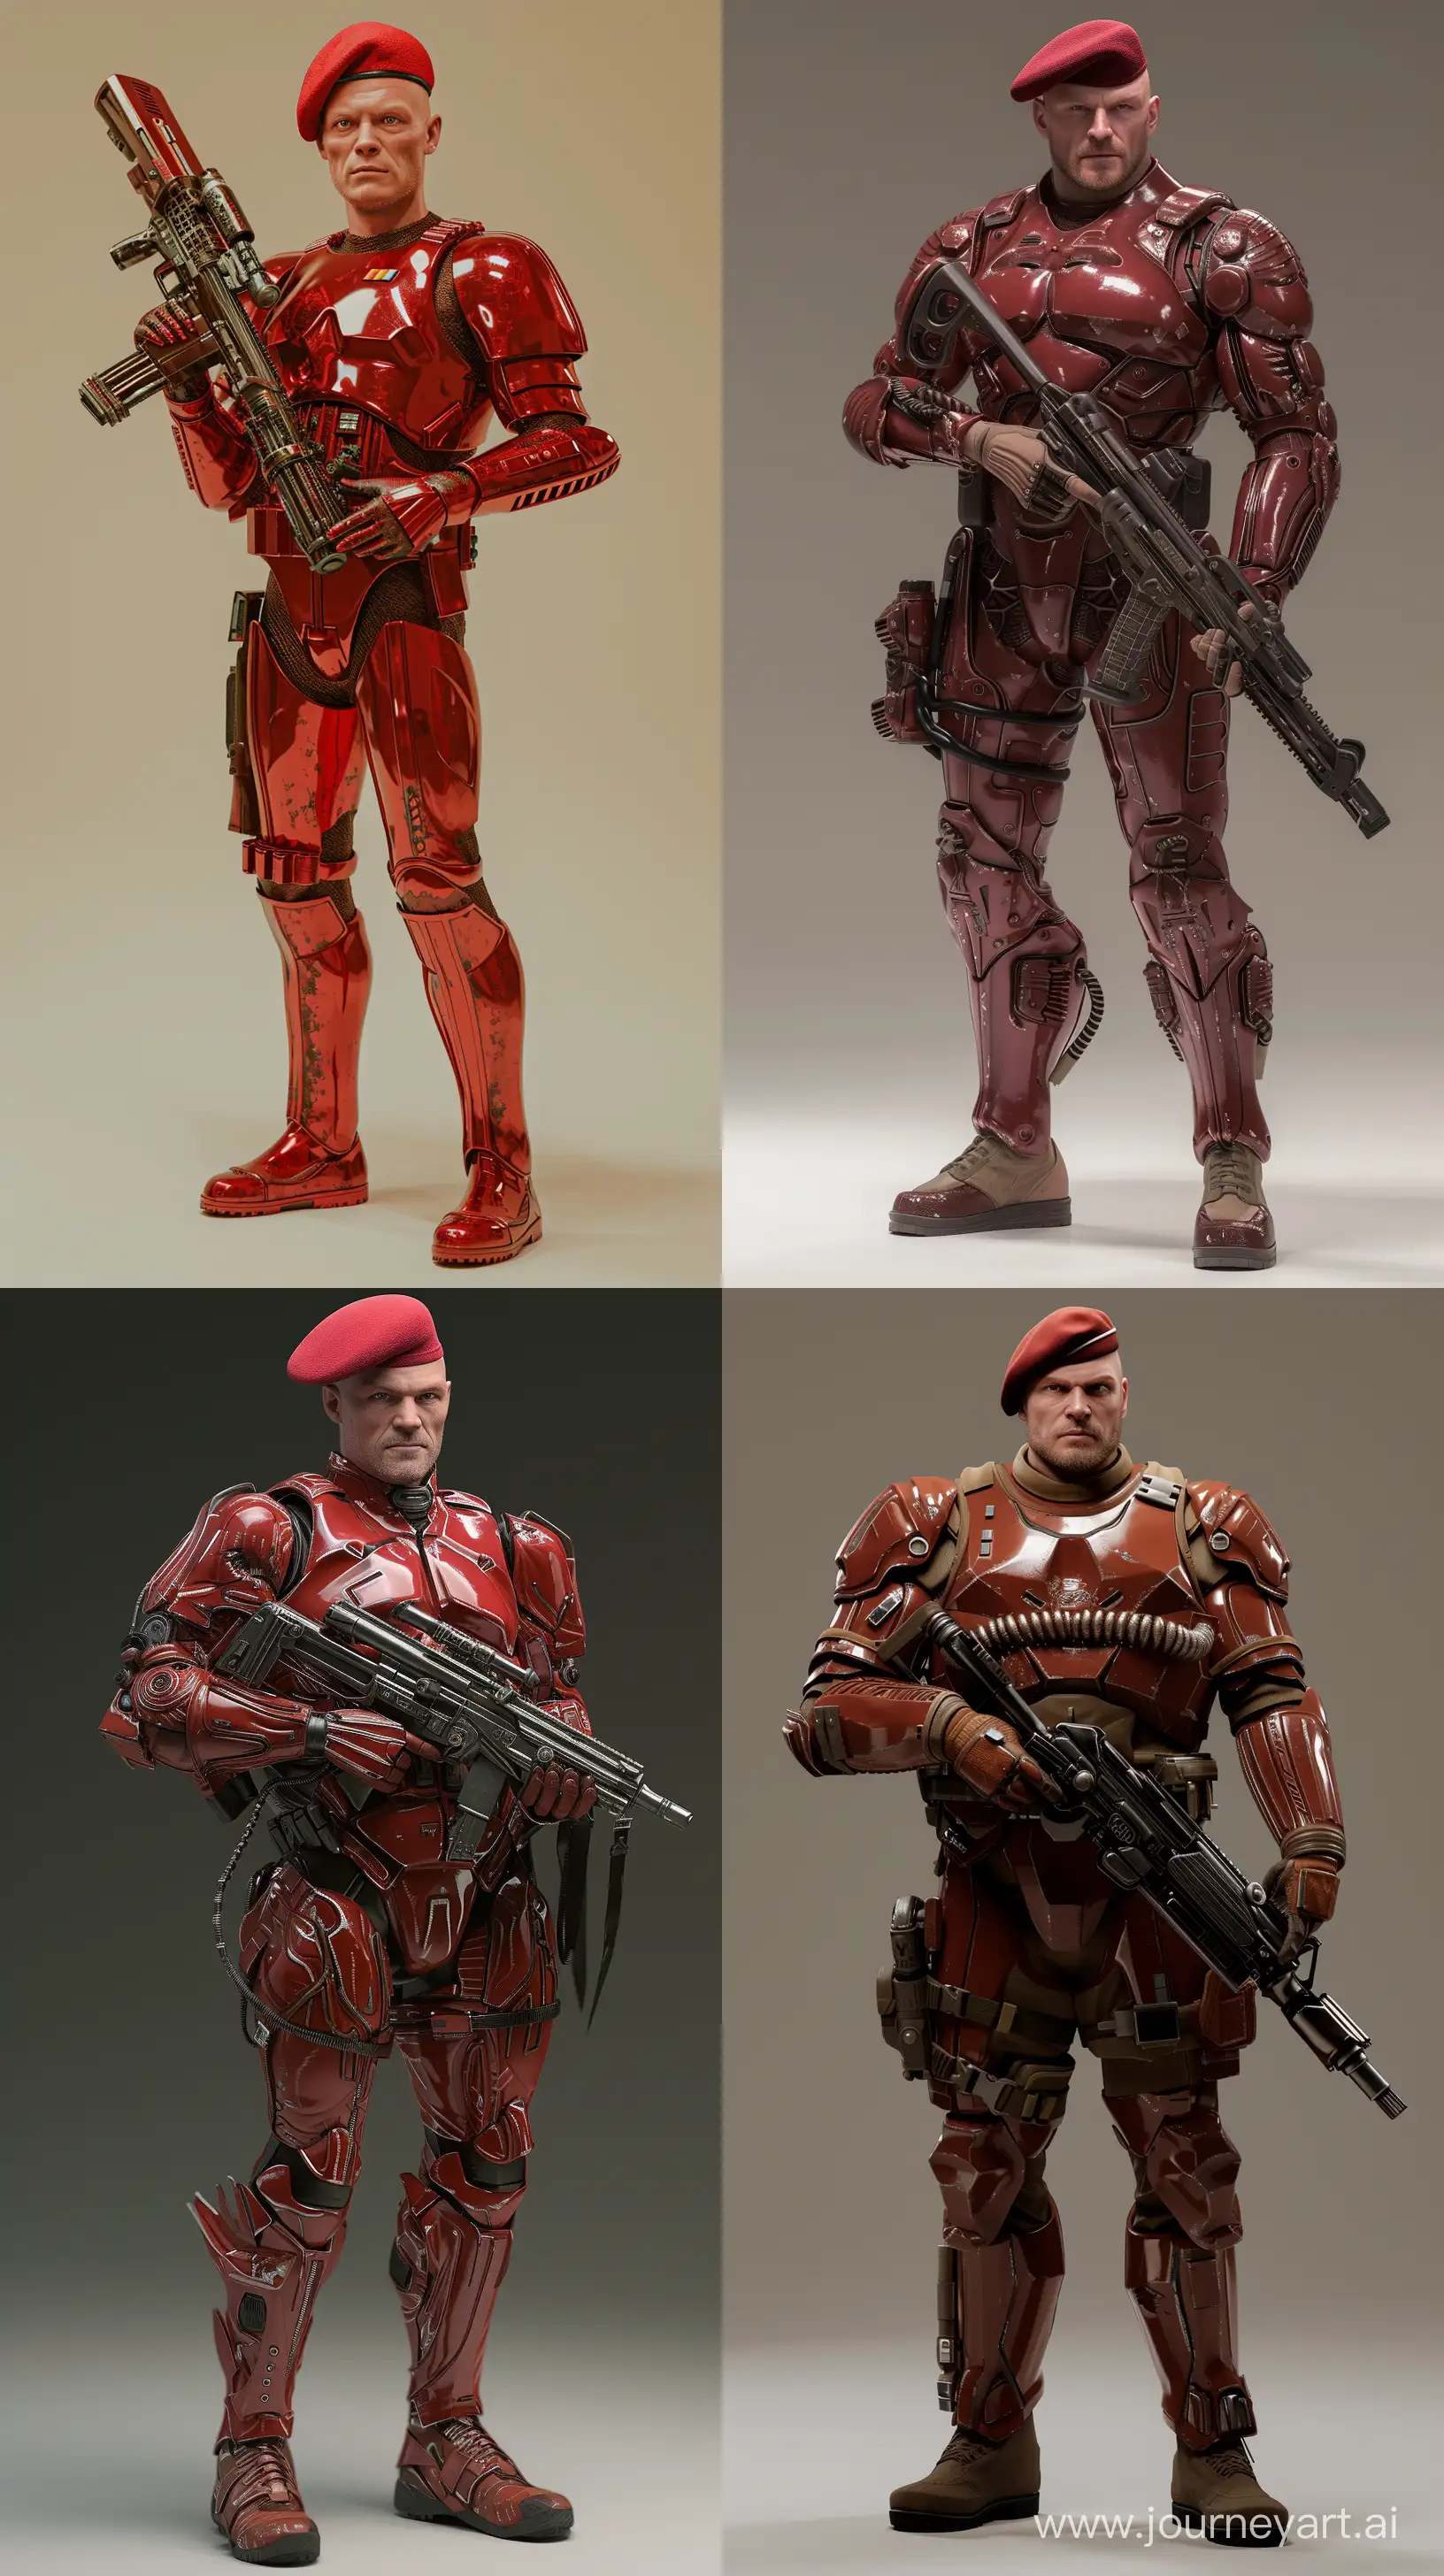 Futuristic-Red-Stormtrooper-in-Action-with-Metal-Rifle